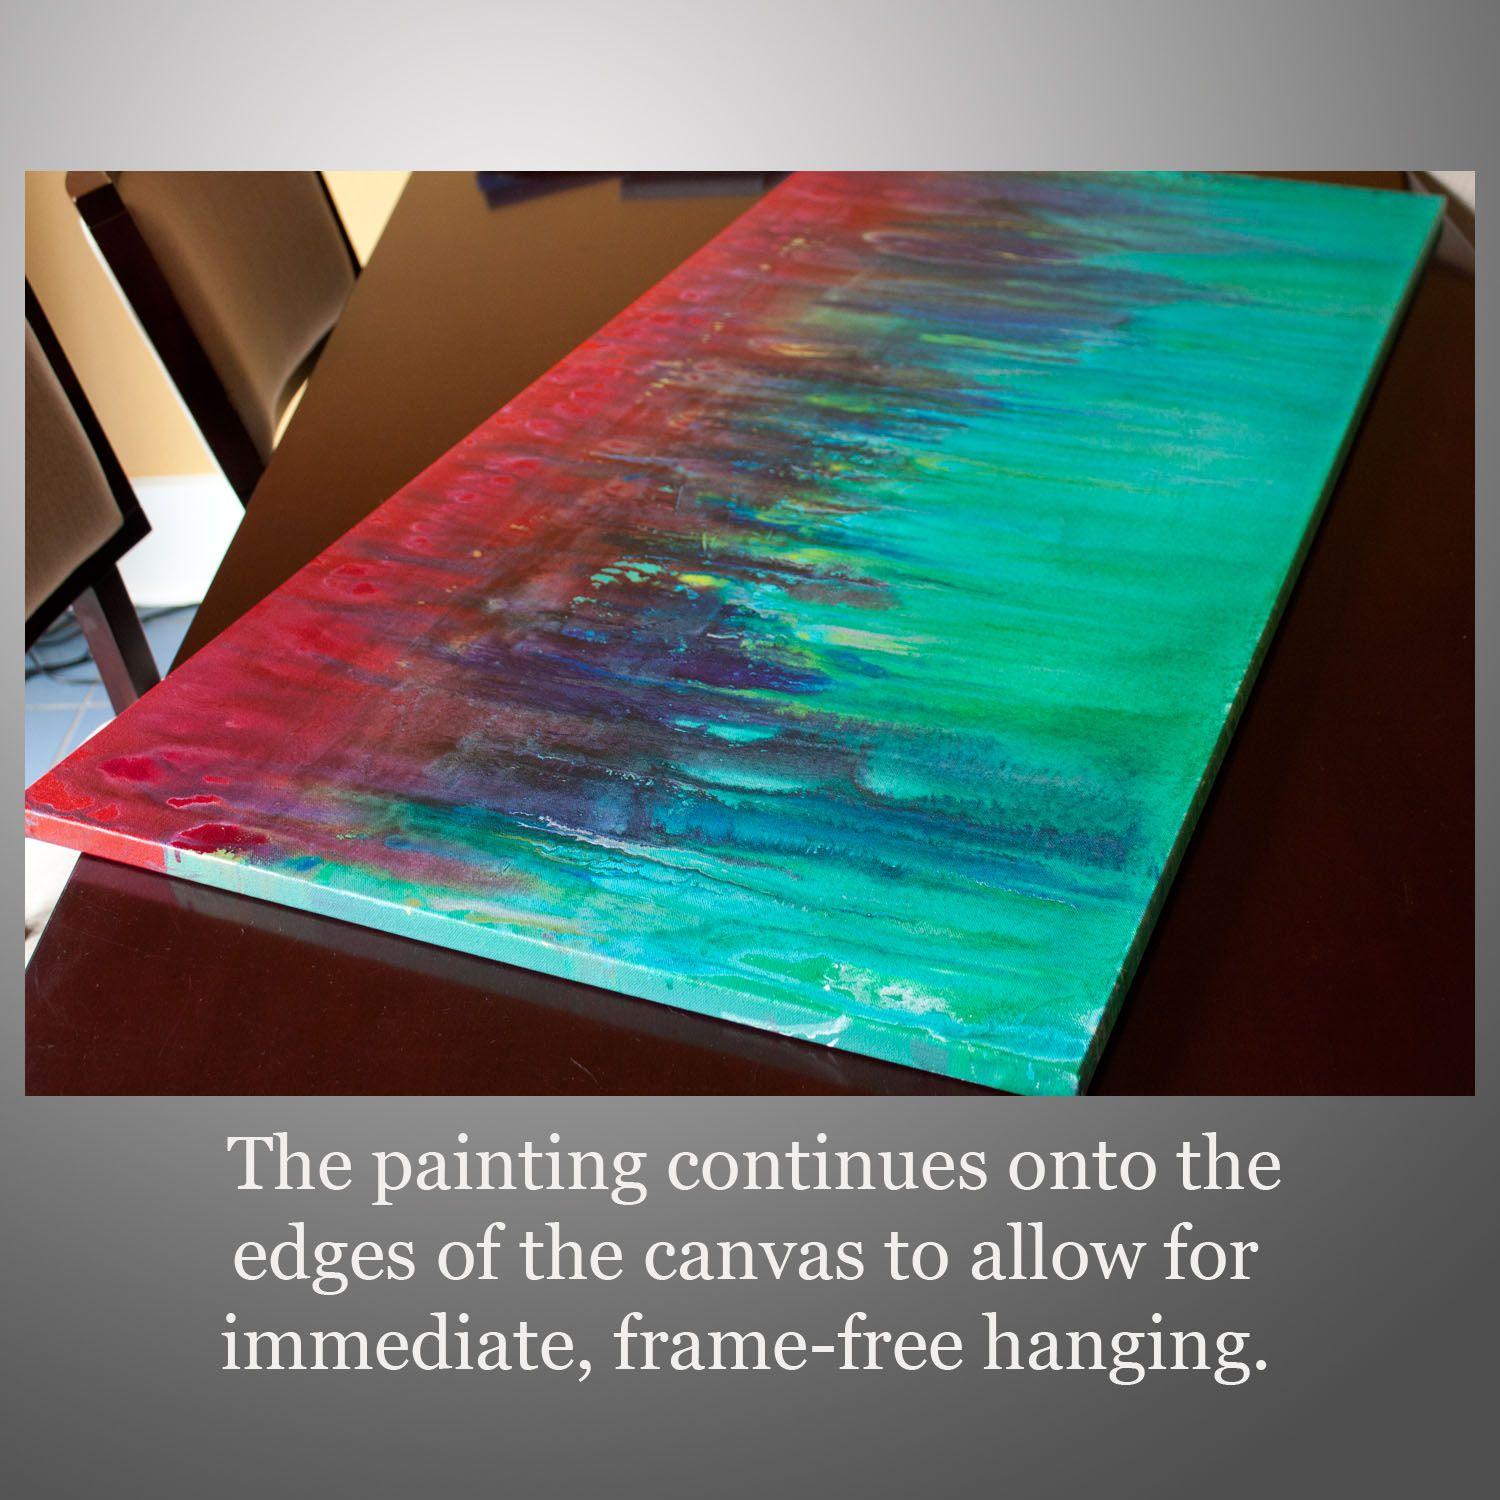 Cascading is an original, modern art painting from the Liquid Industrial series. This one-of-a-kind painting was created with acrylic paint on gallery-wrapped canvas. It has a width of 48 inches and a height of 24 inches with a depth of 1 inch